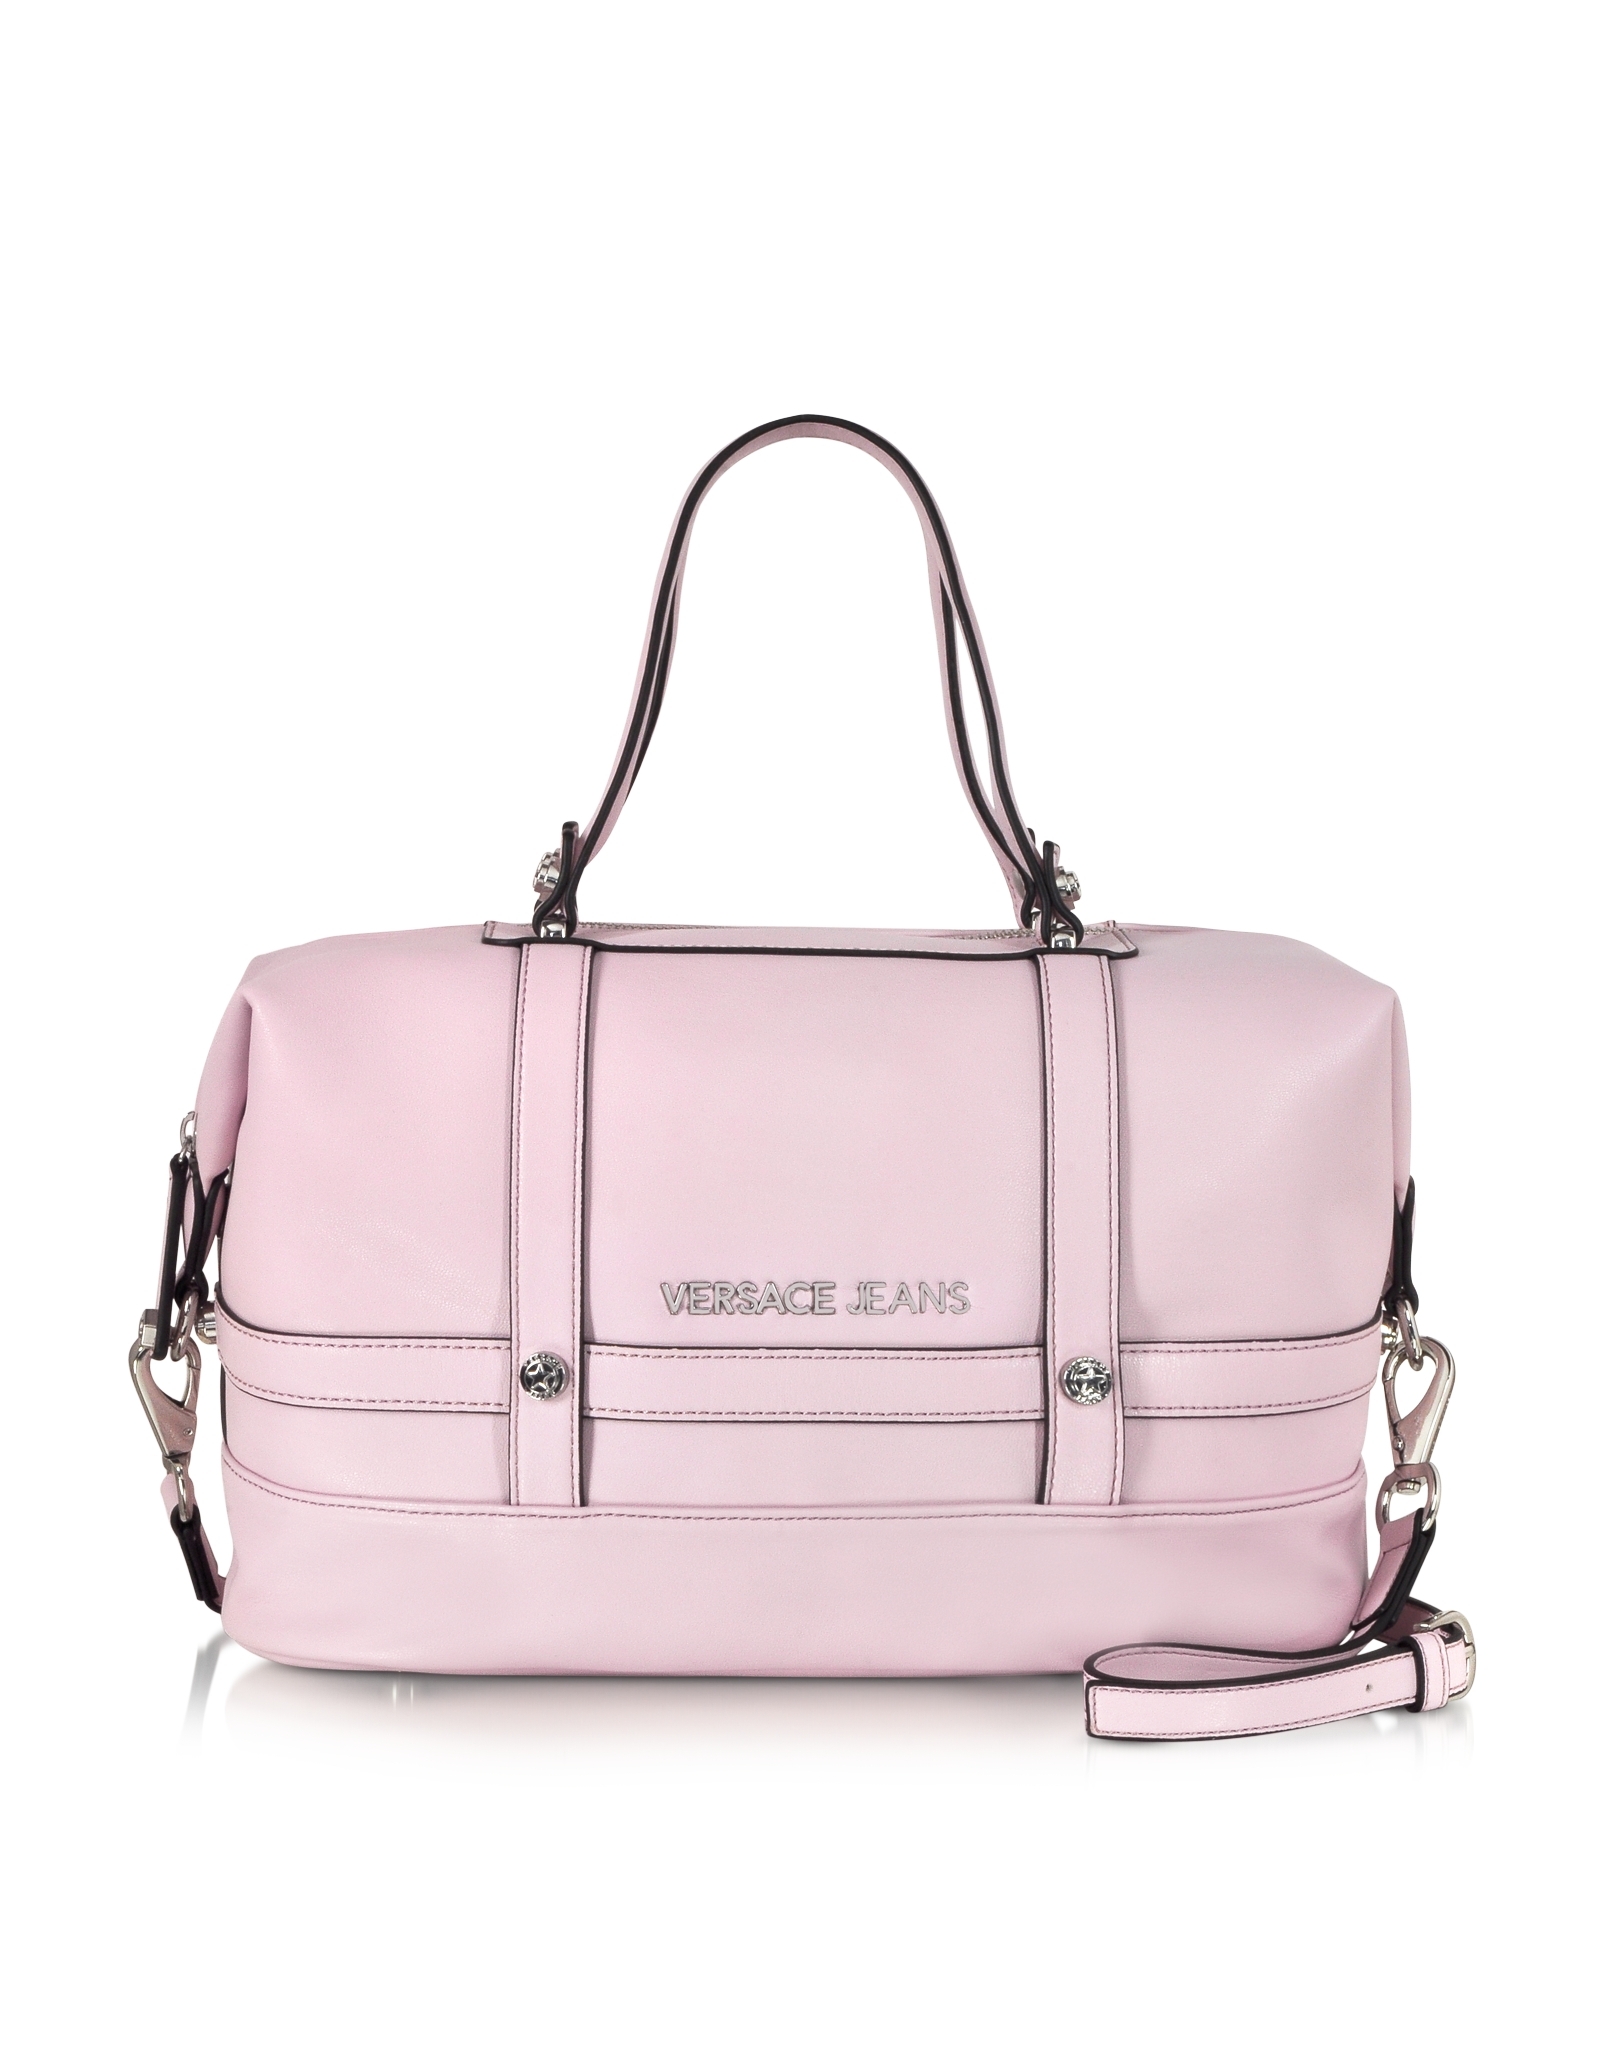 Lyst - Versace Jeans Light Pink Eco Leather Satchel W/Shoulder Strap in Pink